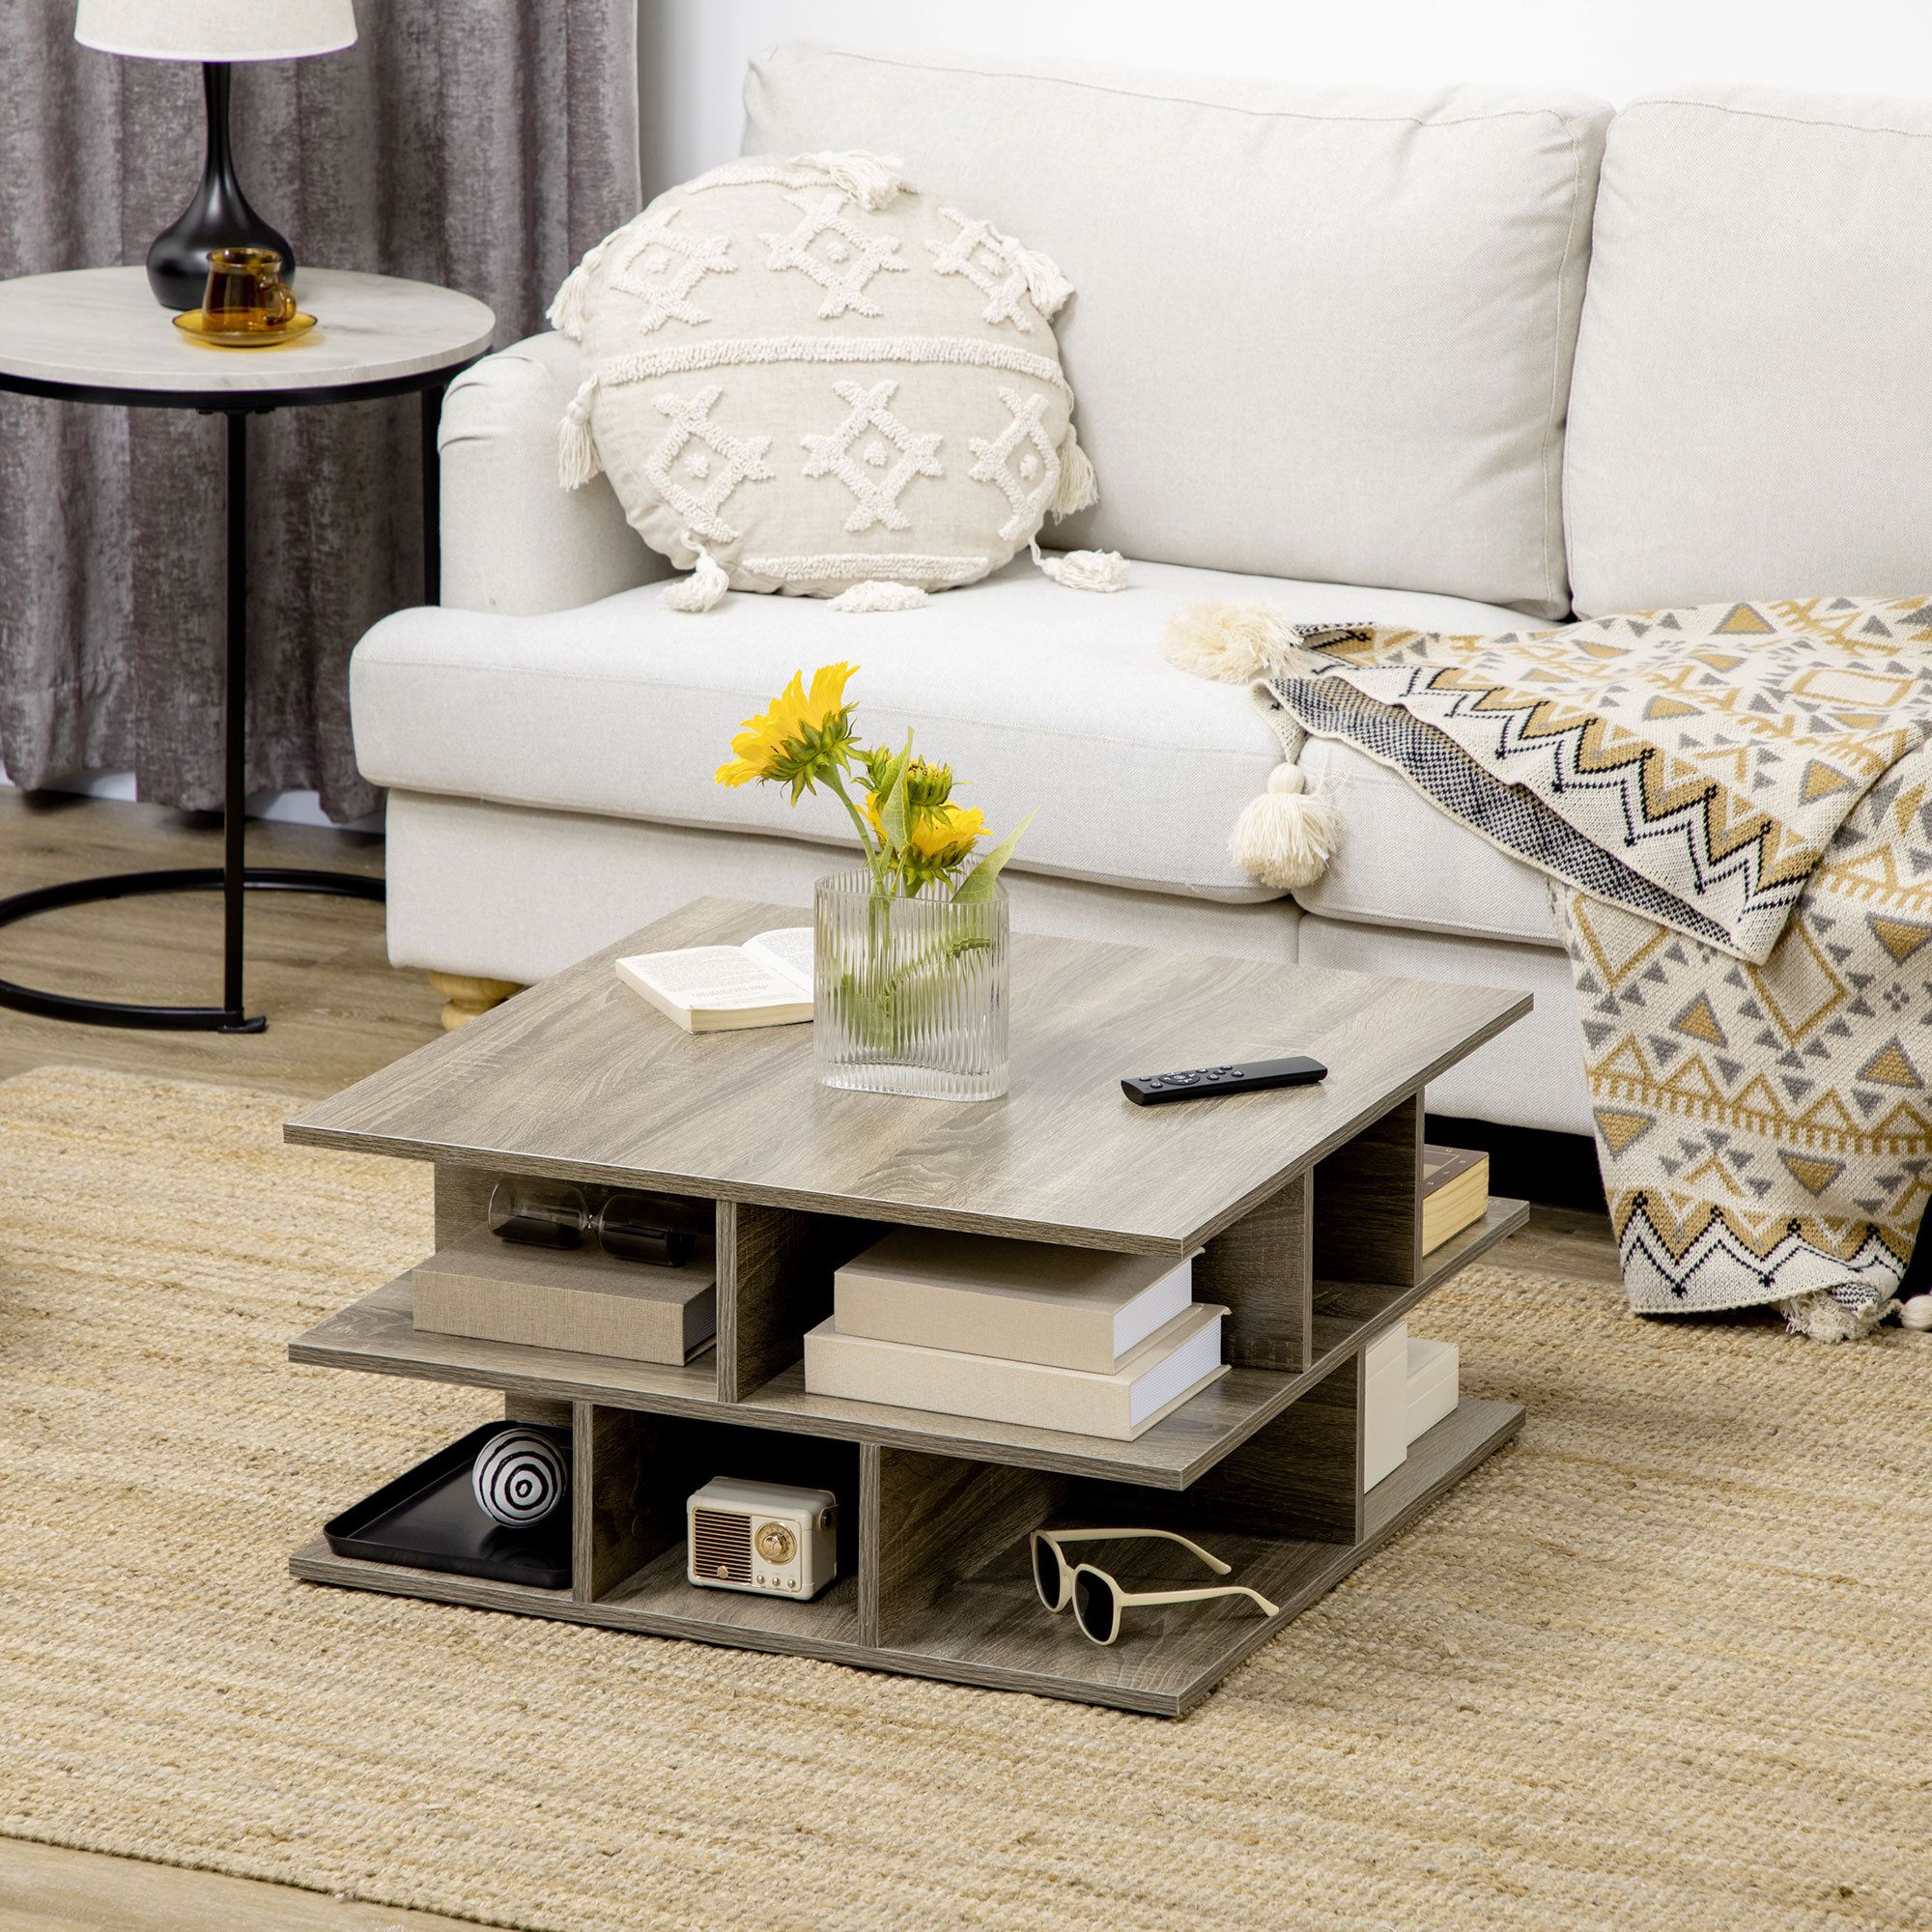 17 Stories Floor Shelf Coffee Table With Storage & Reviews | Wayfair.co (View 12 of 15)